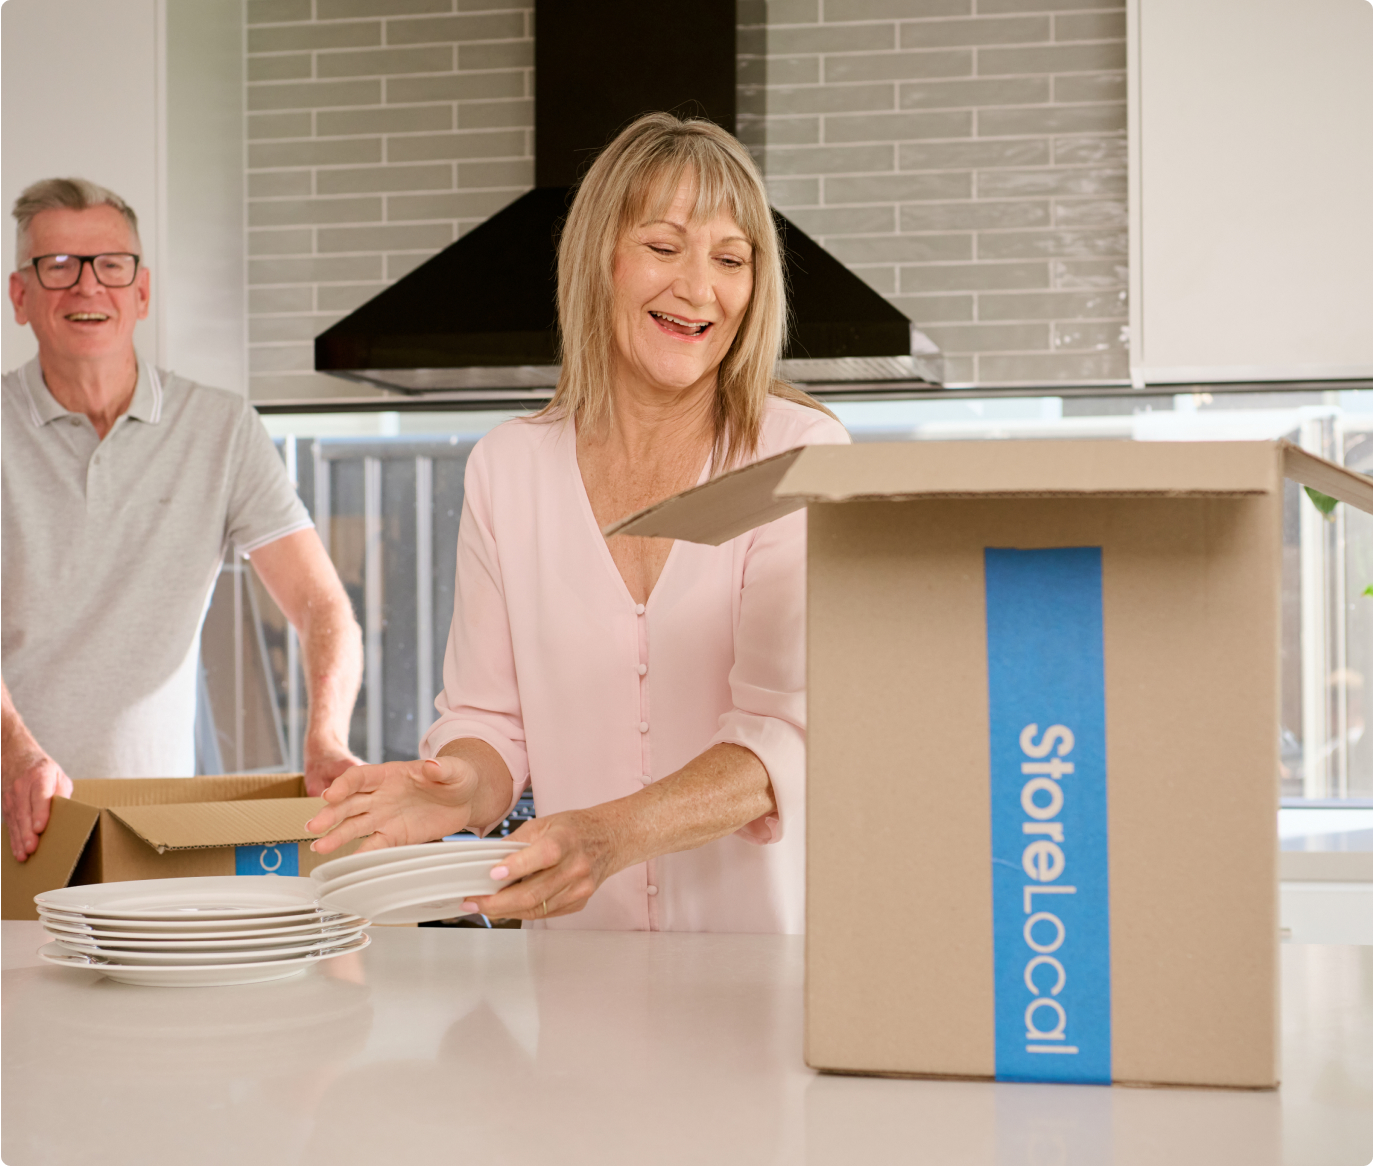 A man and woman opening a box in the kitchen.